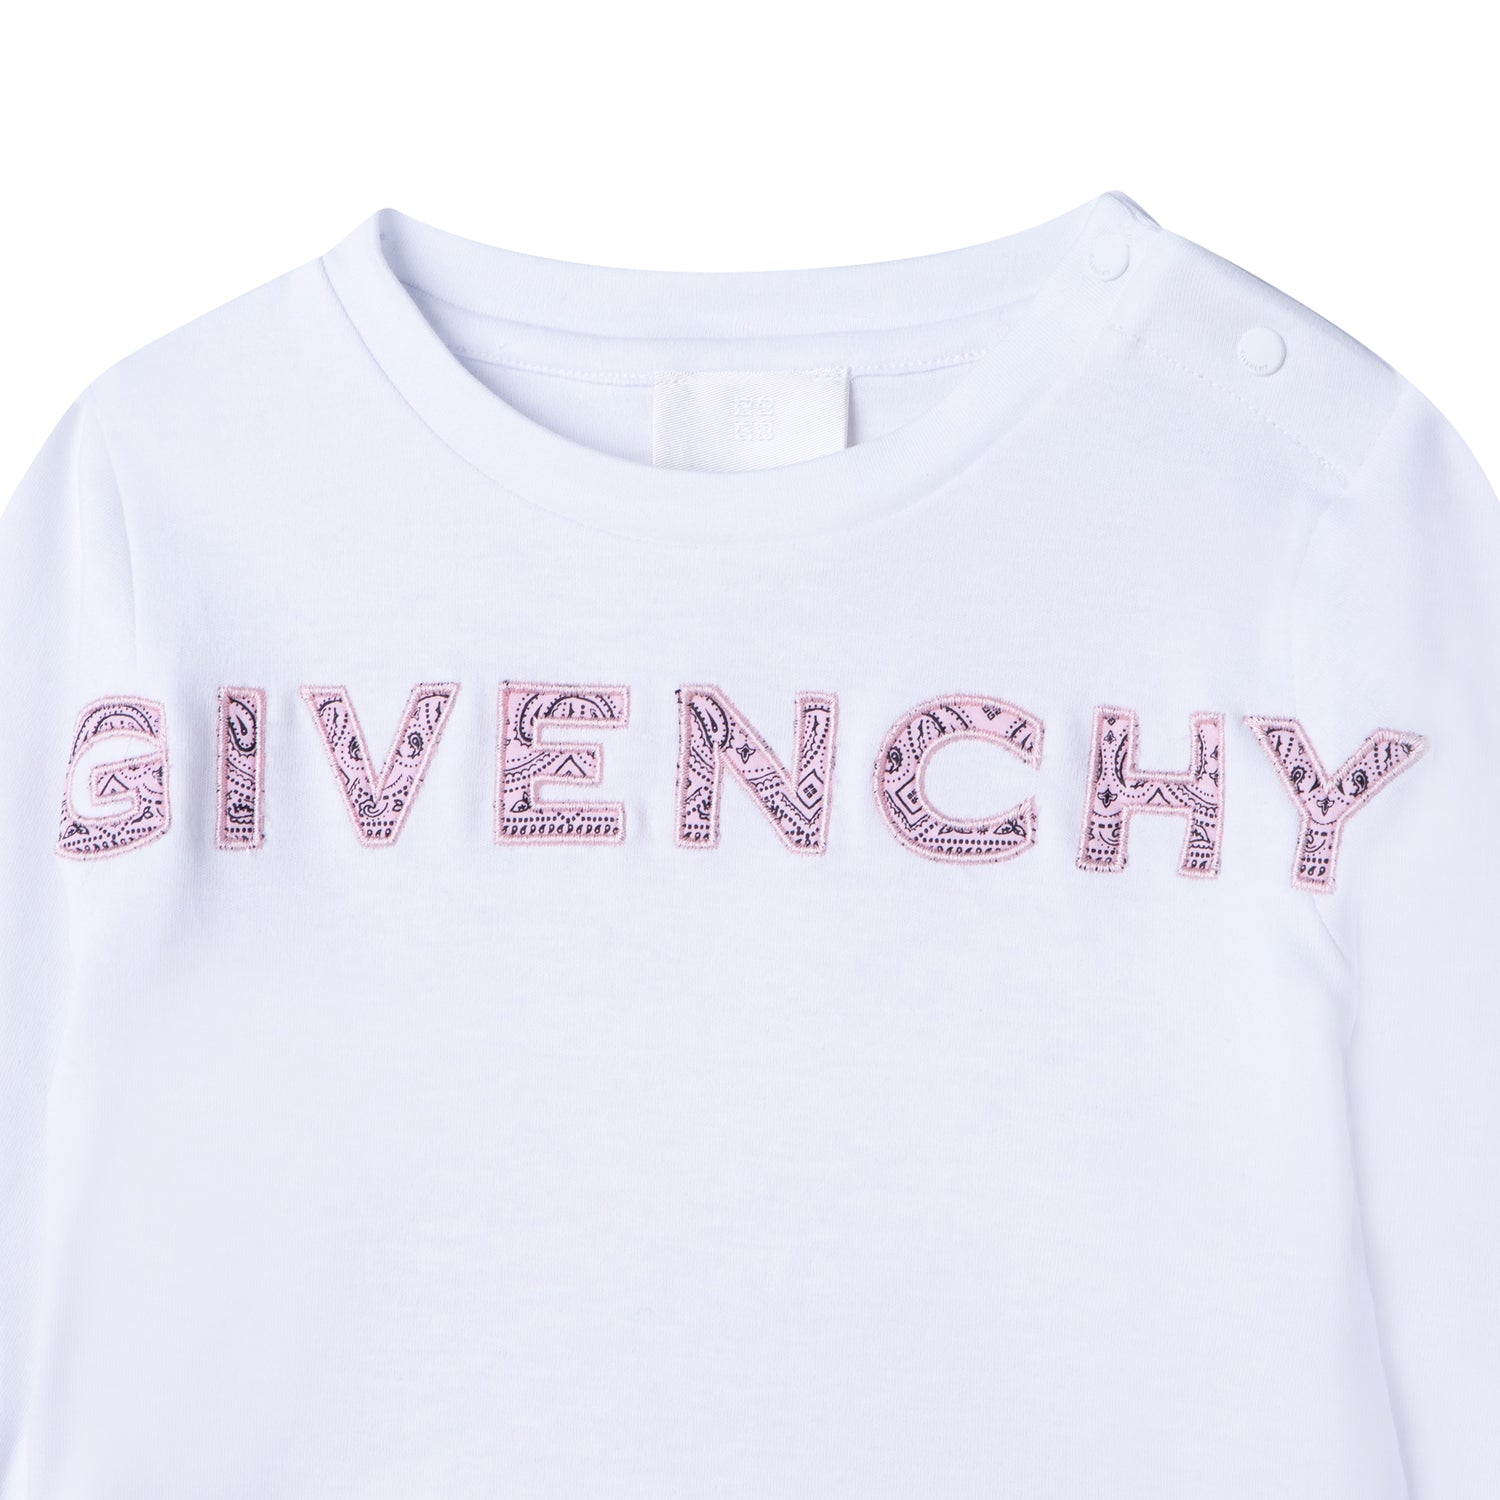 Givenchy Long Sleeve T-Shirt Style: H05240